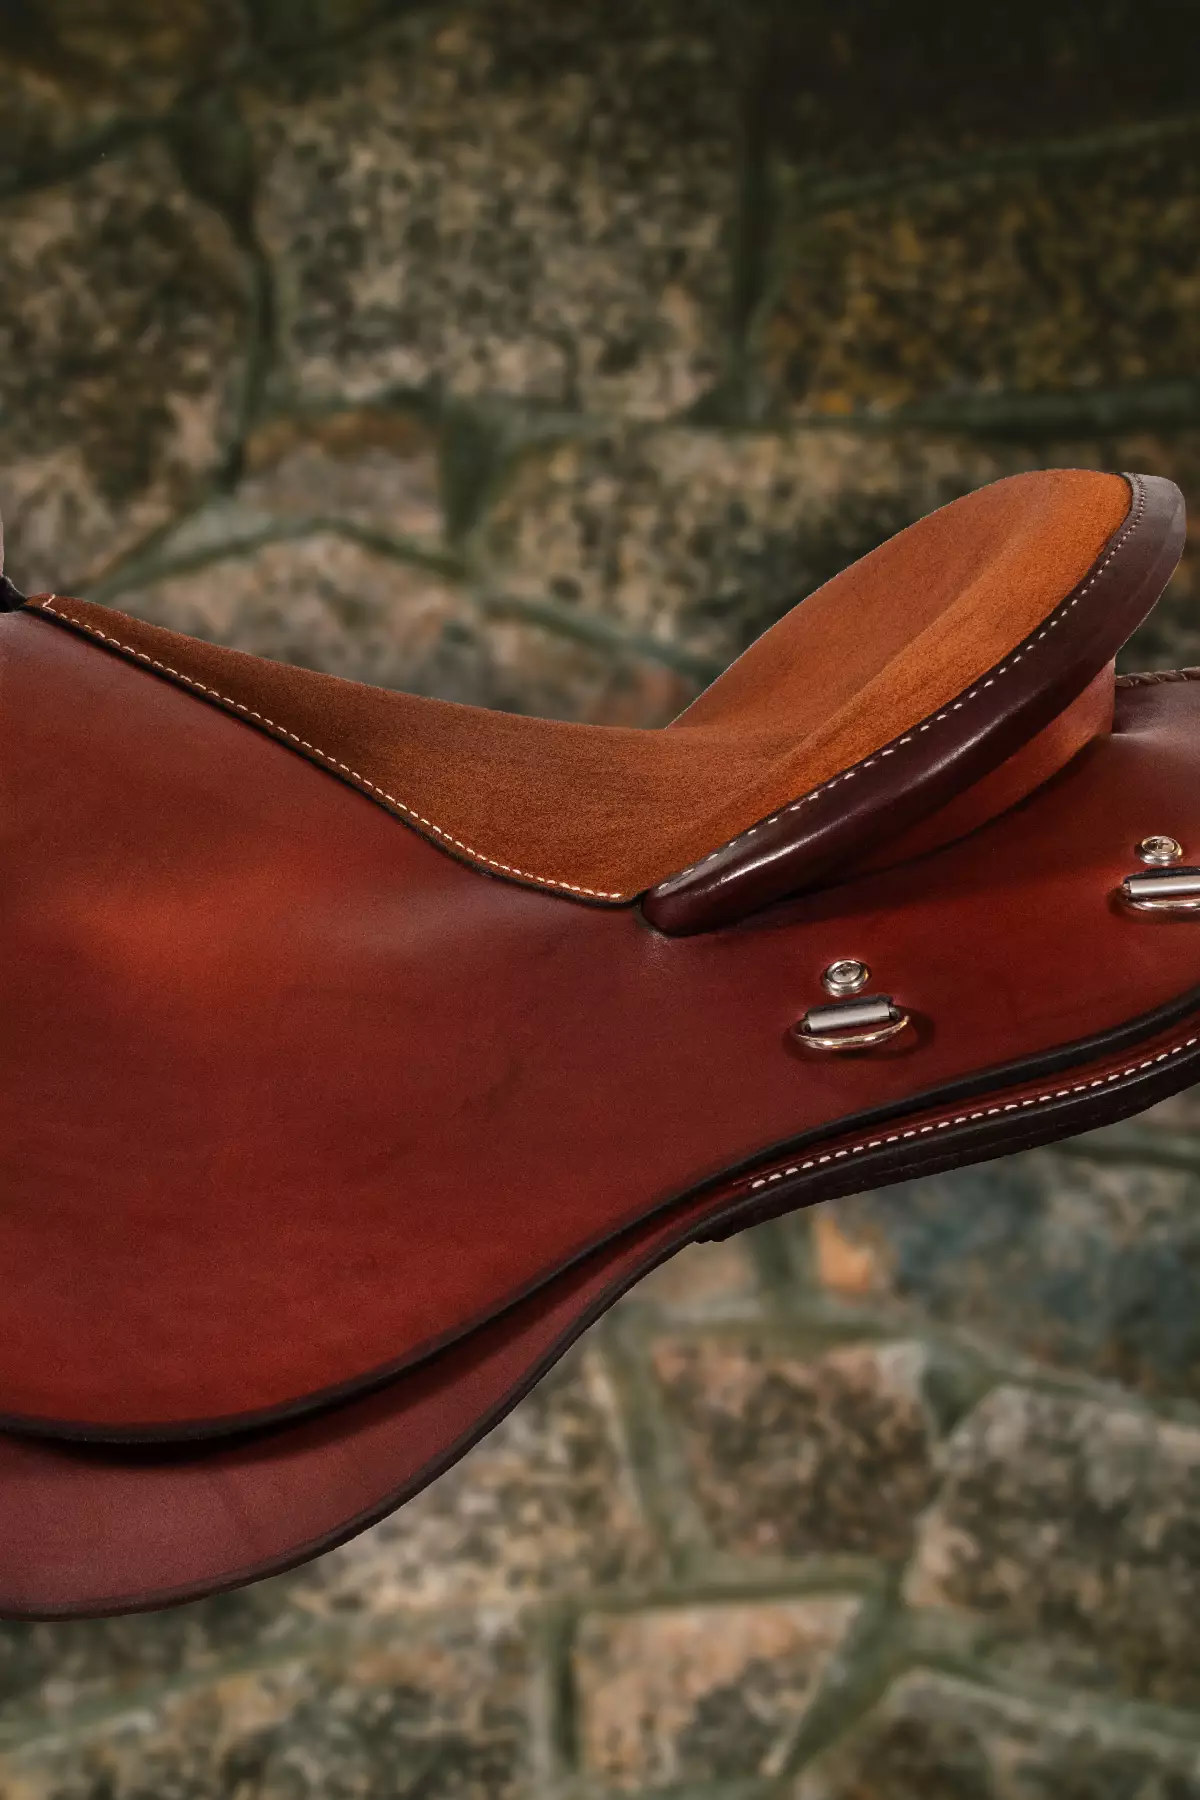 Saddle Features 13